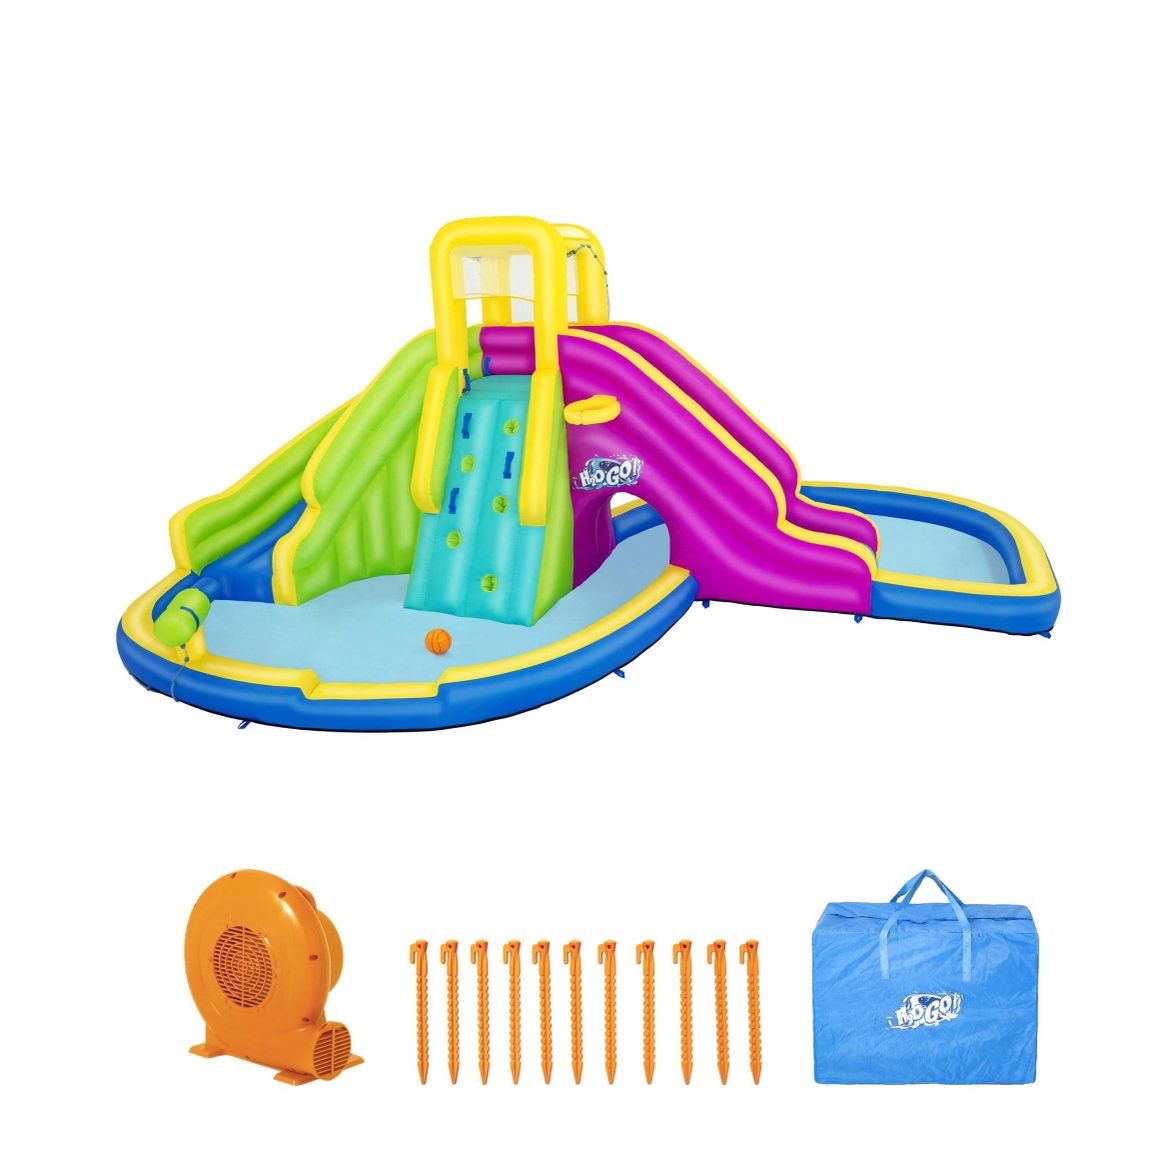 H2OGO! Funfinity Splash Kids Inflatable Mega Water Park with Blower- Mega parque acuático inflable